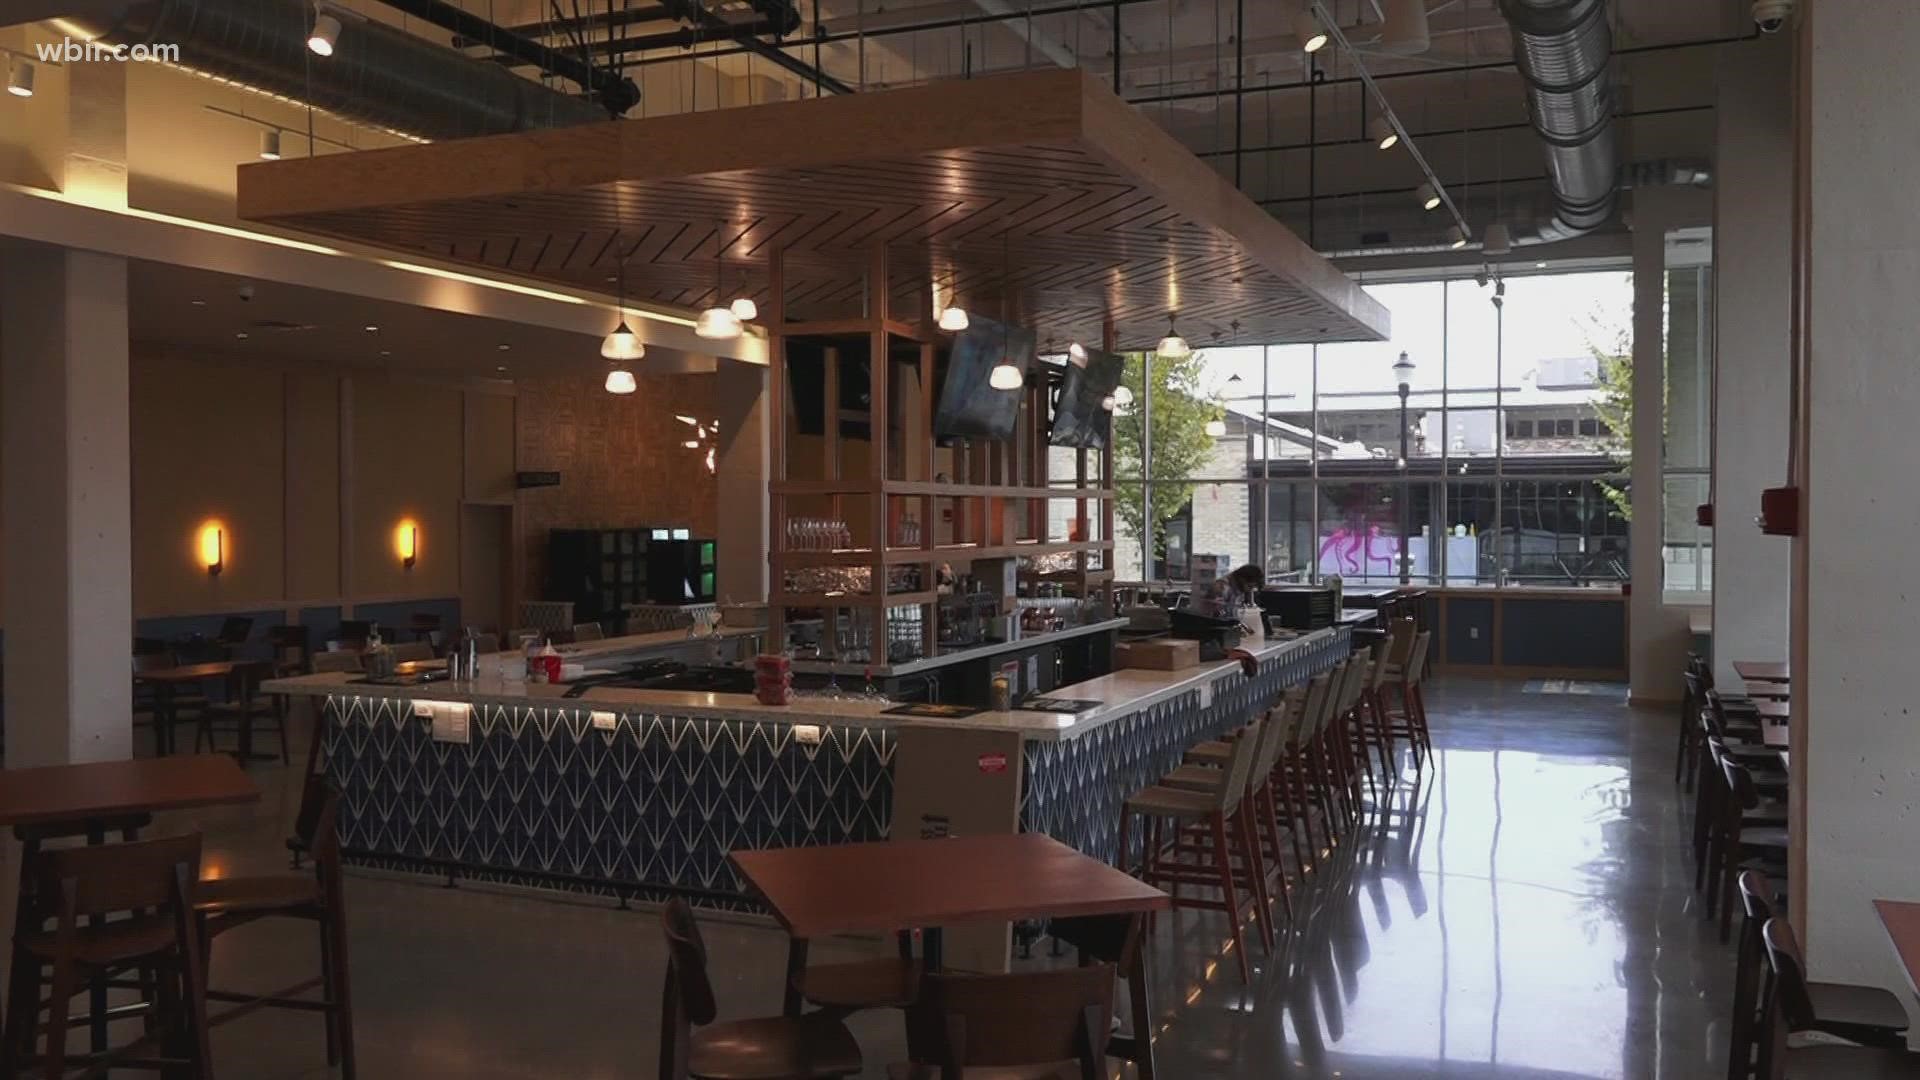 The food hall concept is the first of its kind in Knoxville. Everything from ramen, to burgers and cookies can be found in the new spot in Regas Square.